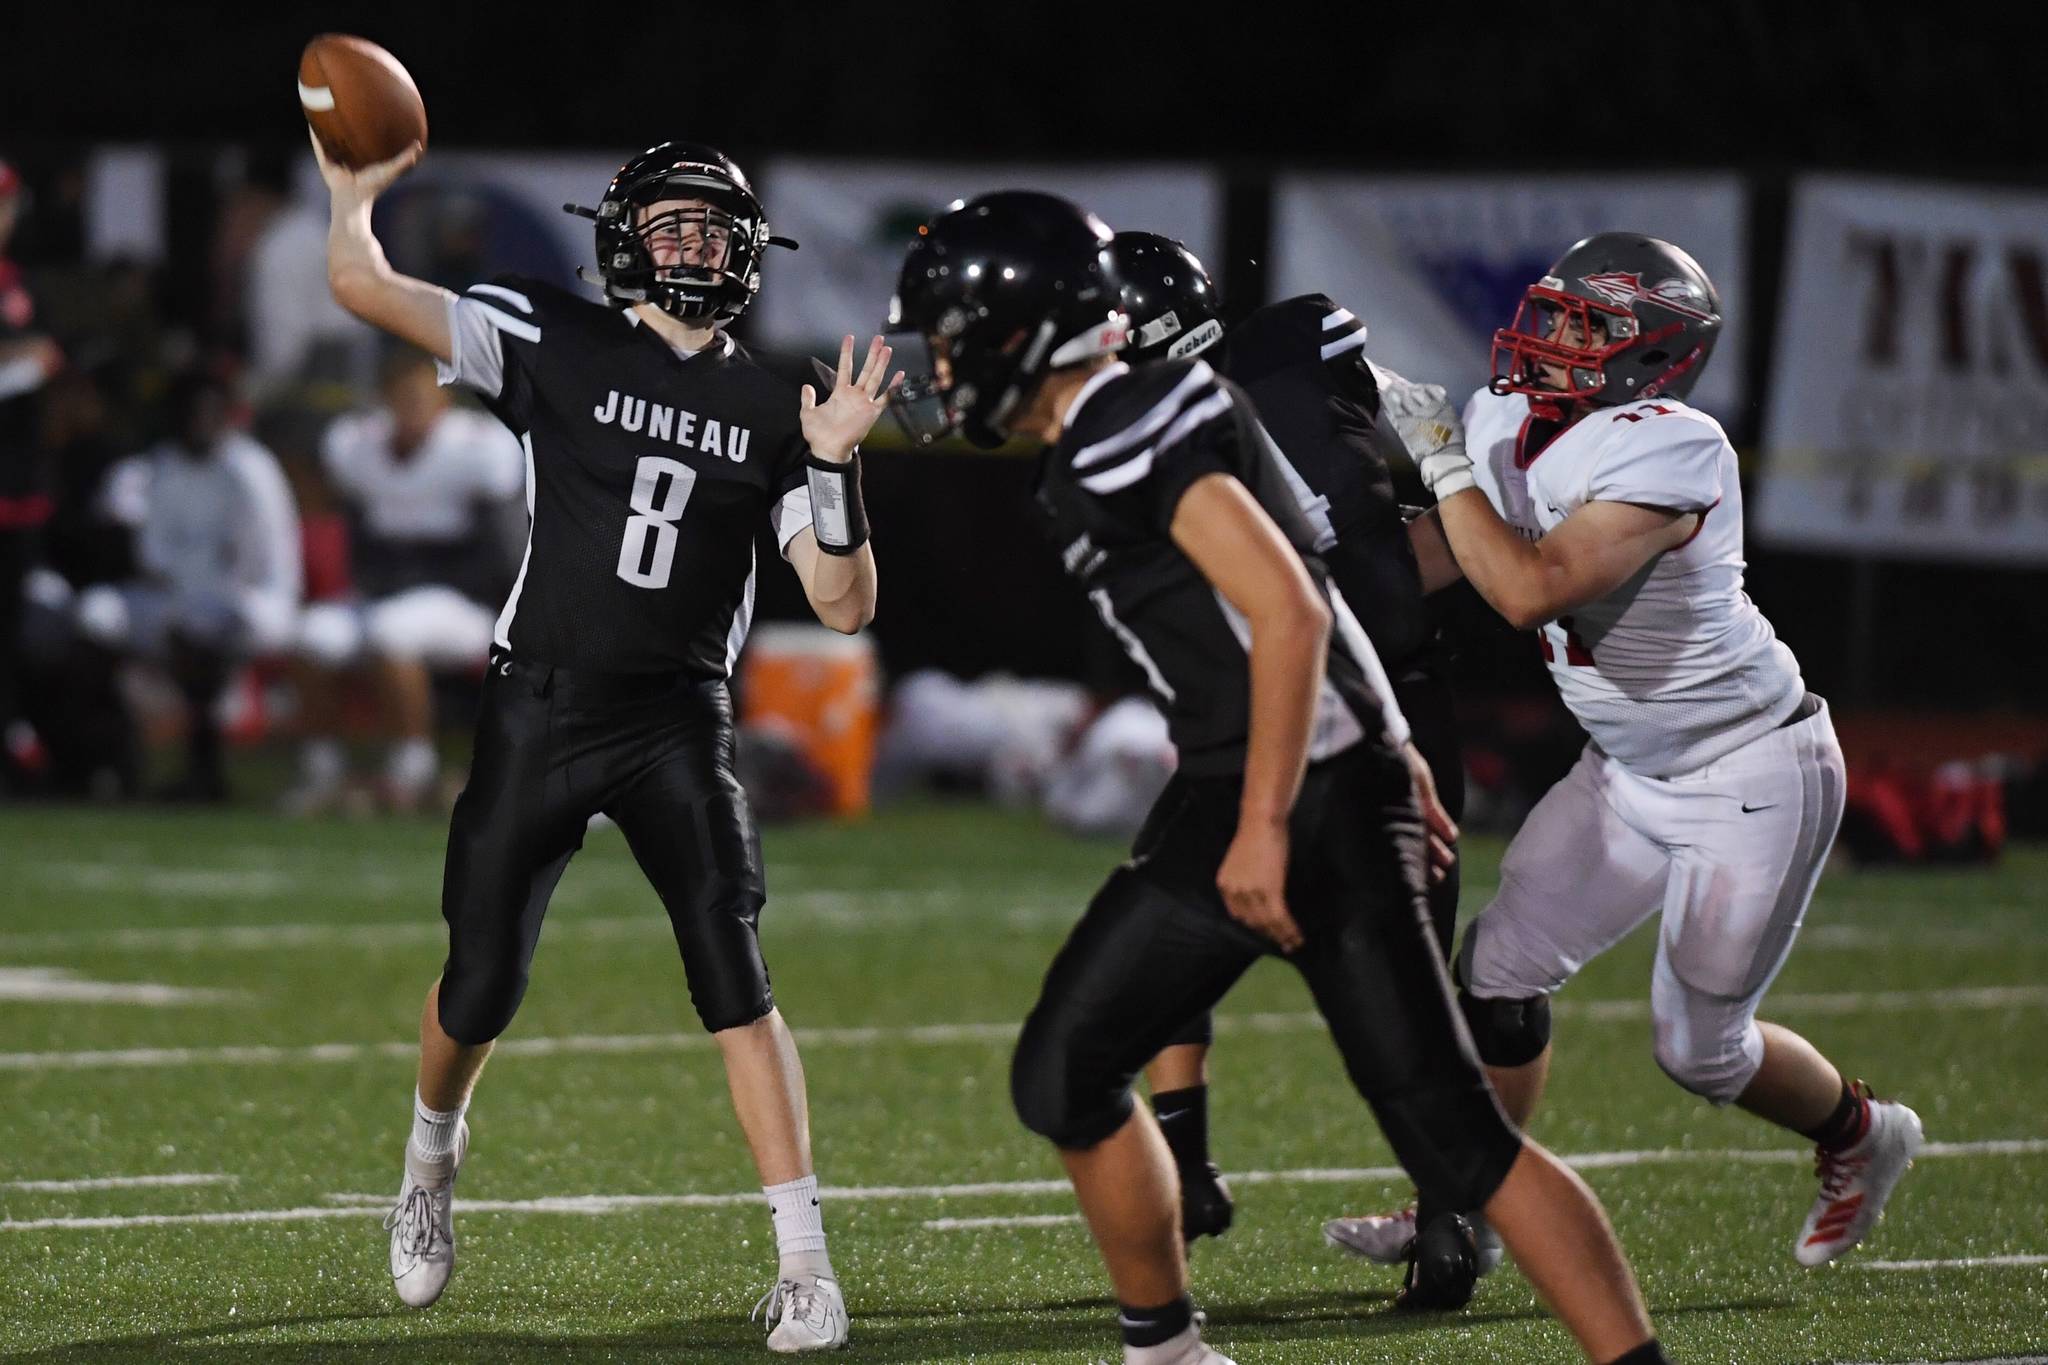 Juneau’s quarterback Noah Chambers throws for a touchdown and a 42-0 lead in the second quarter against Wasilla at Adair-Kennedy Memorial Field on Friday, Sept. 6, 2019. (Michael Penn | Juneau Empire)